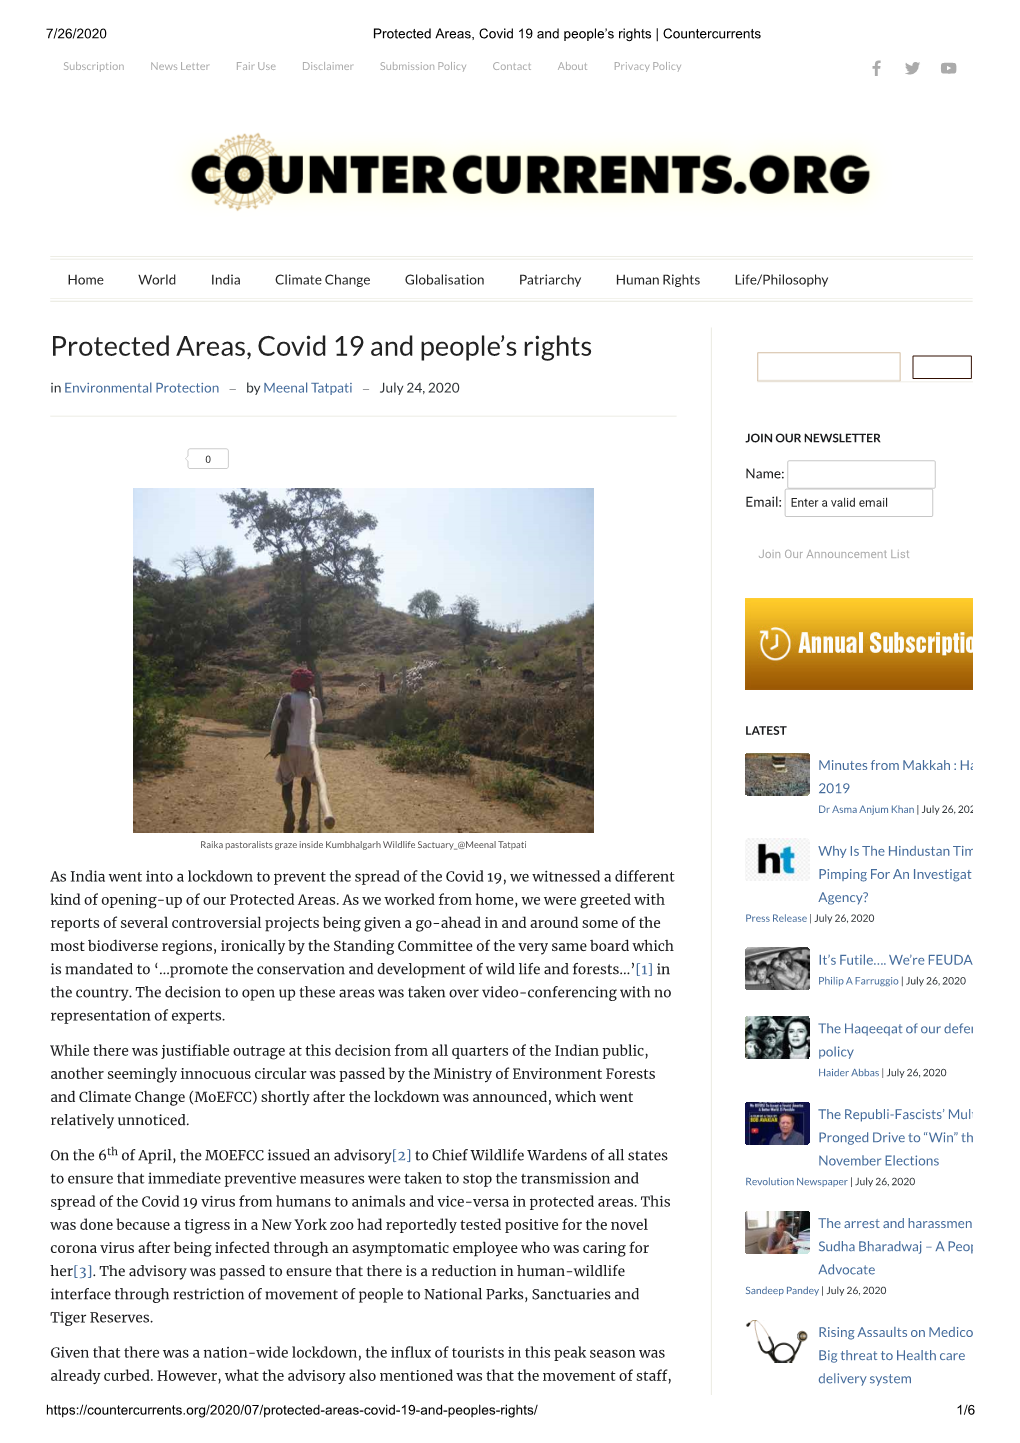 Protected Areas, Covid 19 and People's Rights